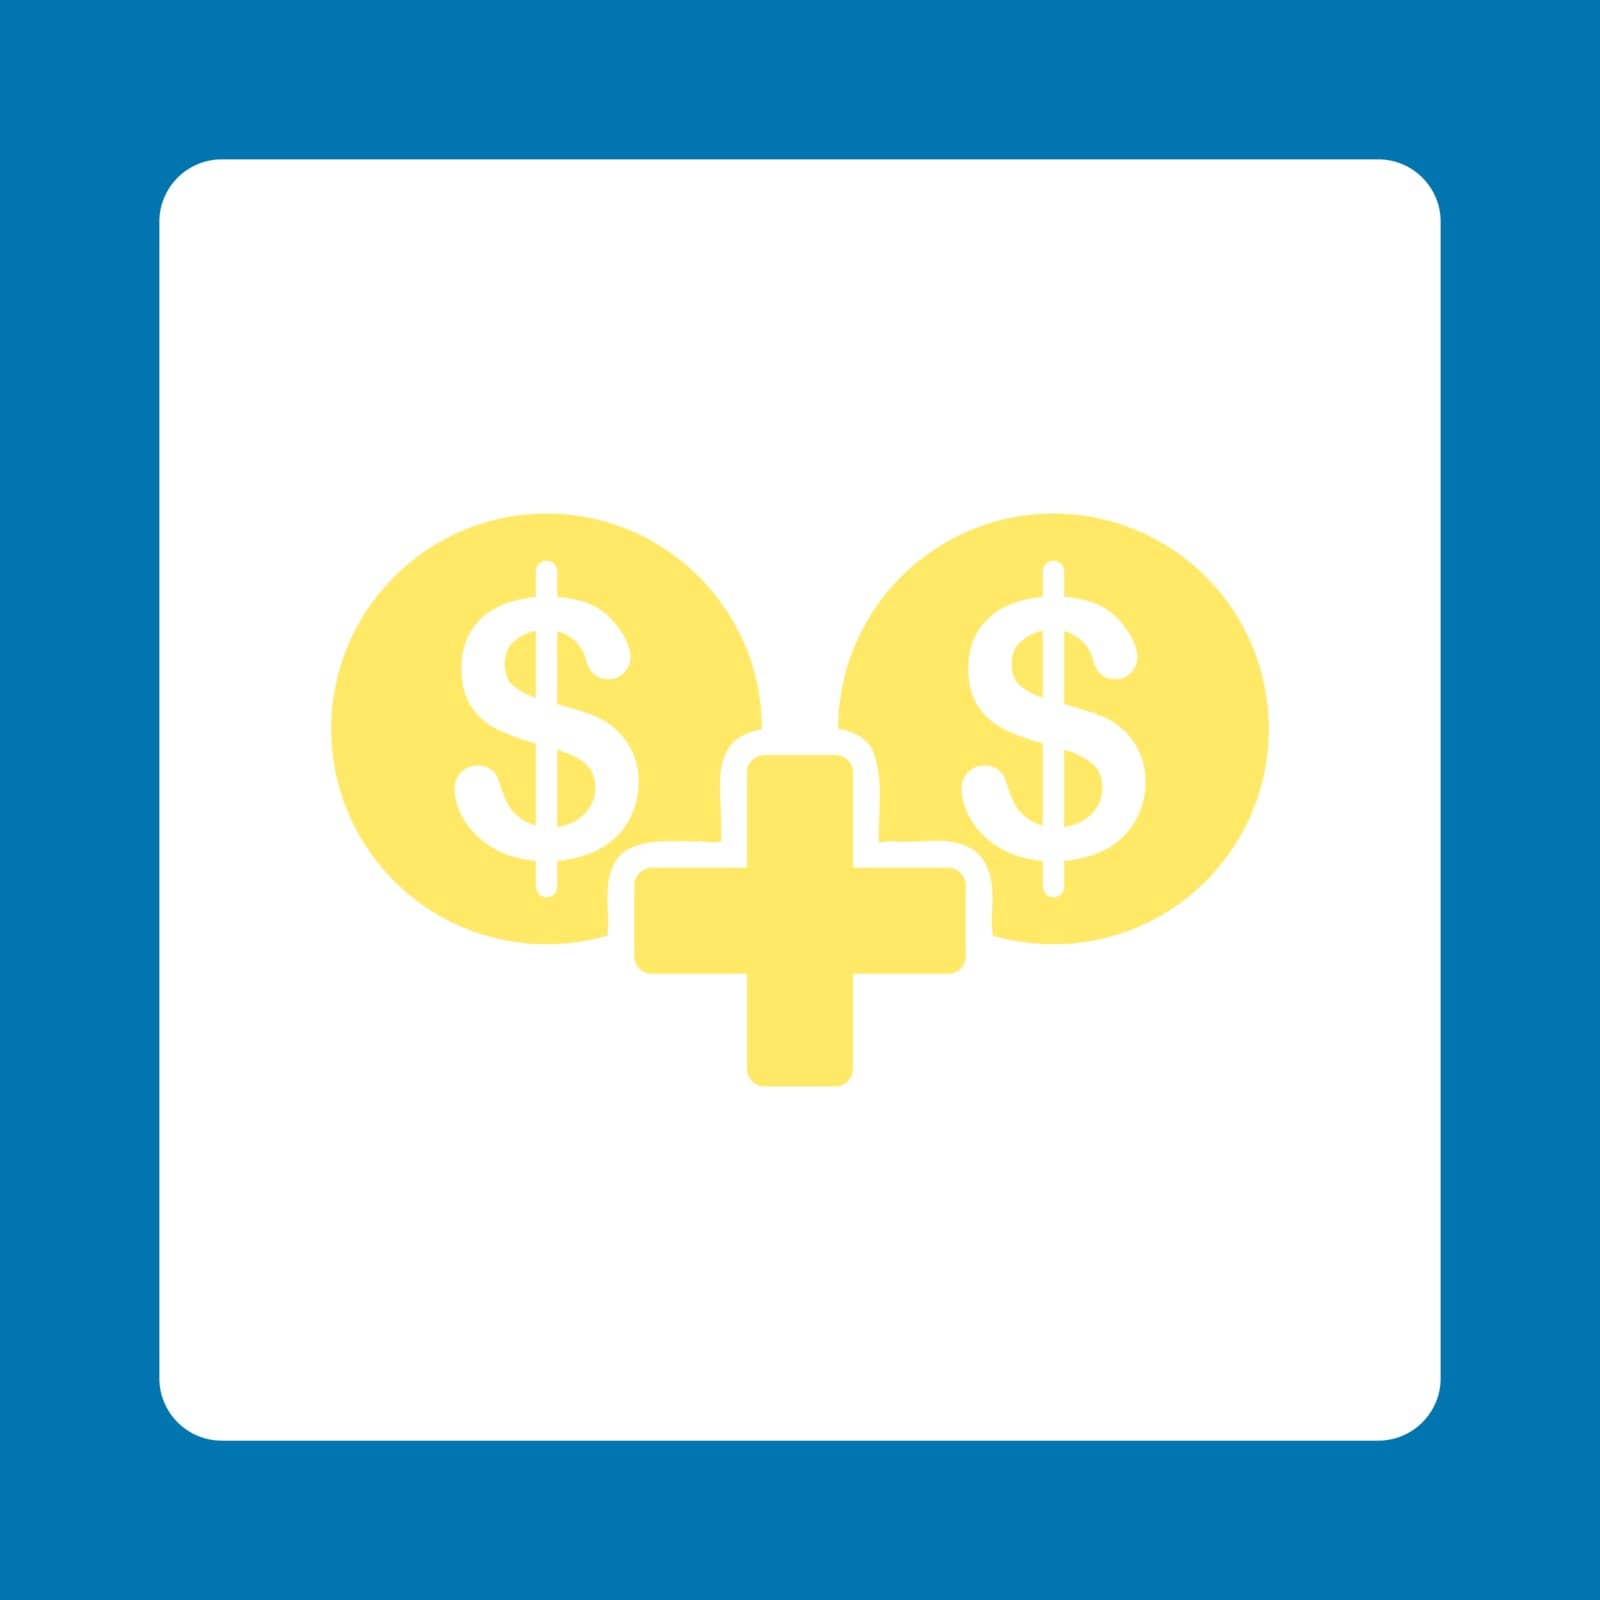 Sum icon. This flat rounded square button uses yellow and white colors and isolated on a blue background.